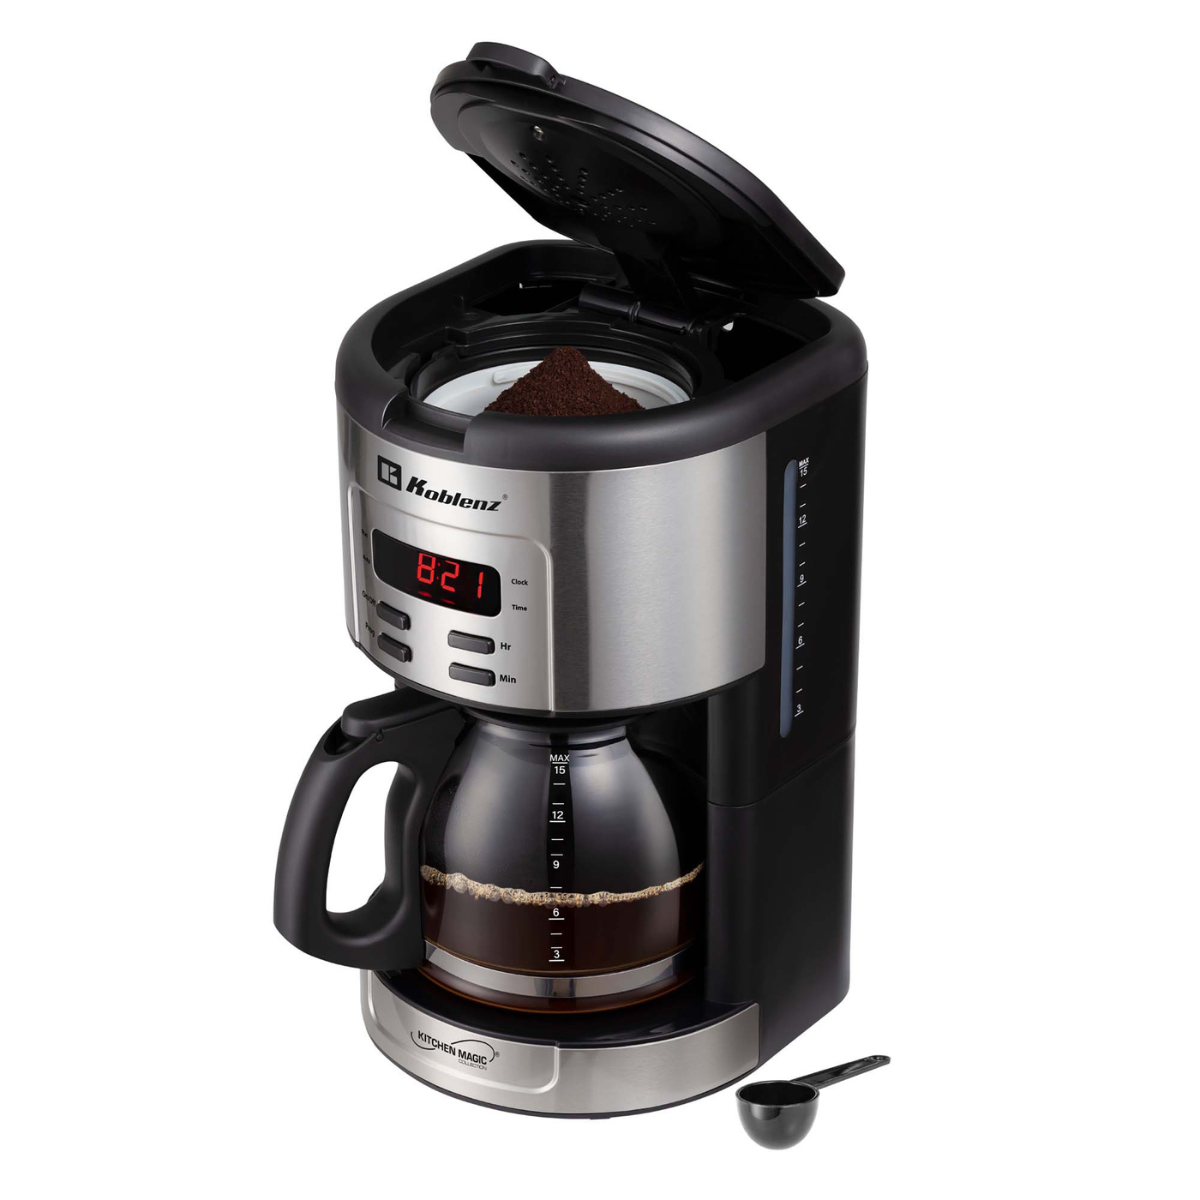 Cafetera Deluxe CKM-215 IN